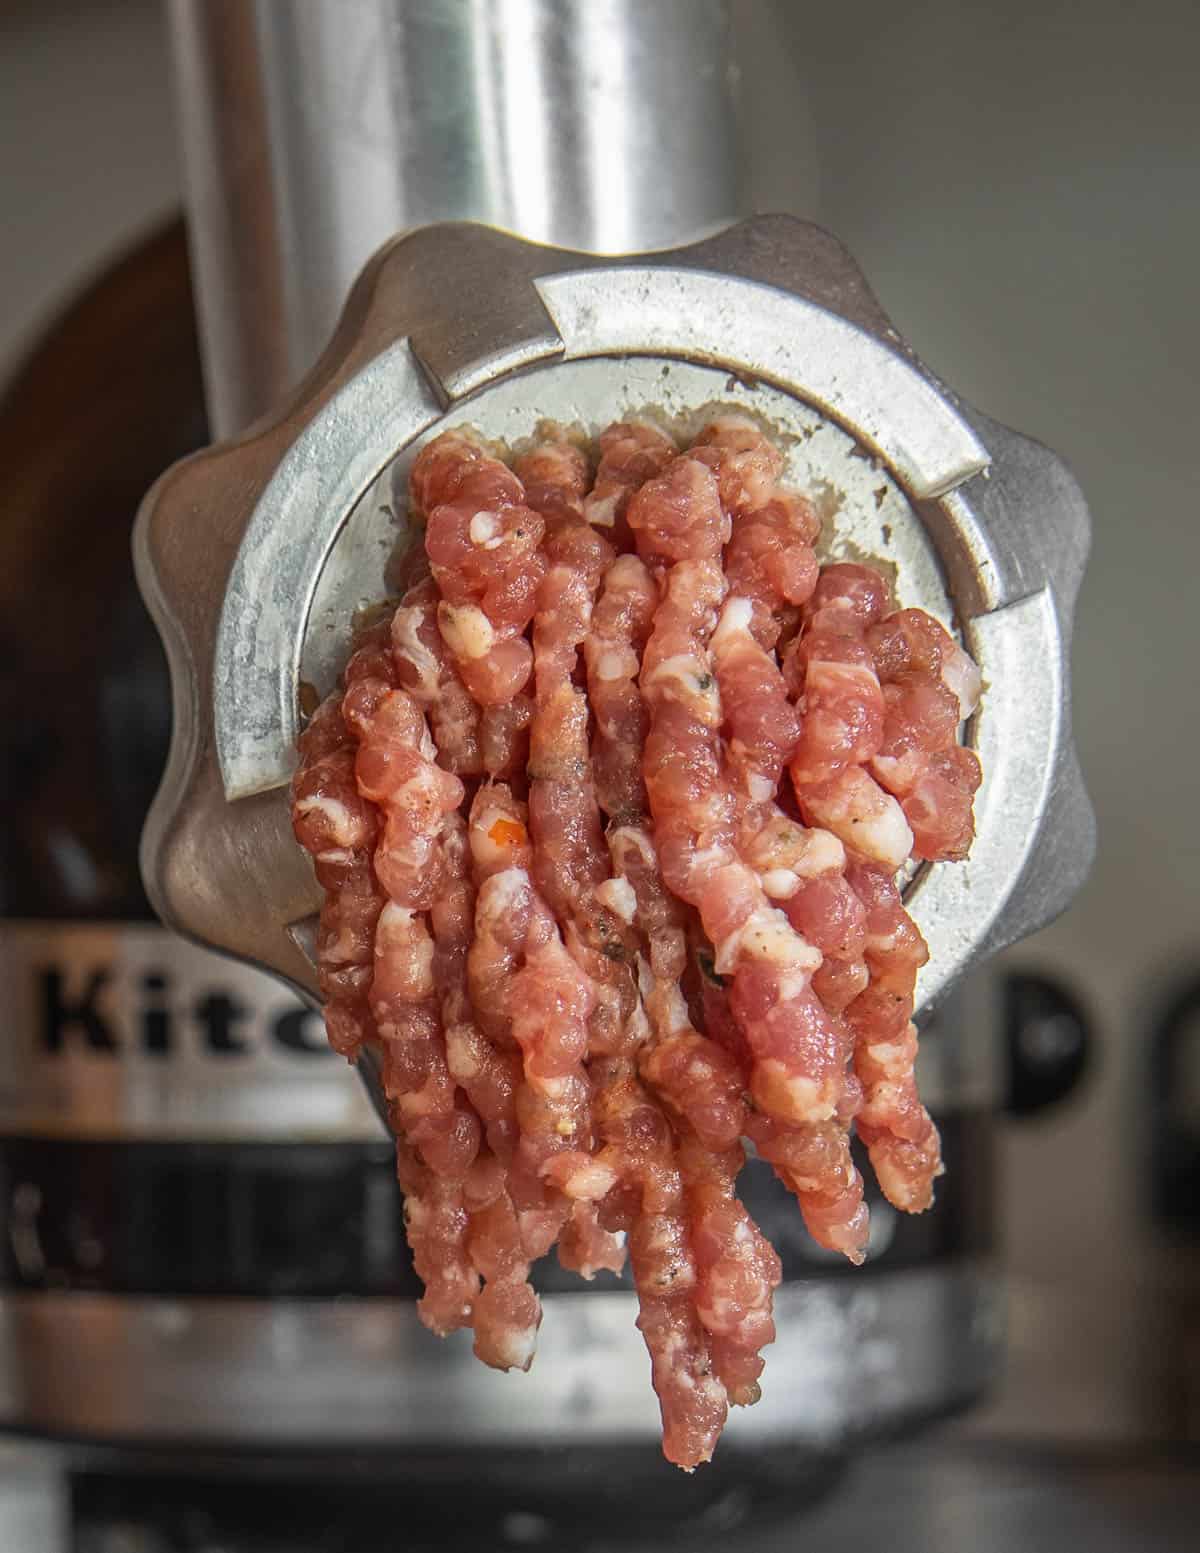 Grinding wild boar meat through a meat grinder.